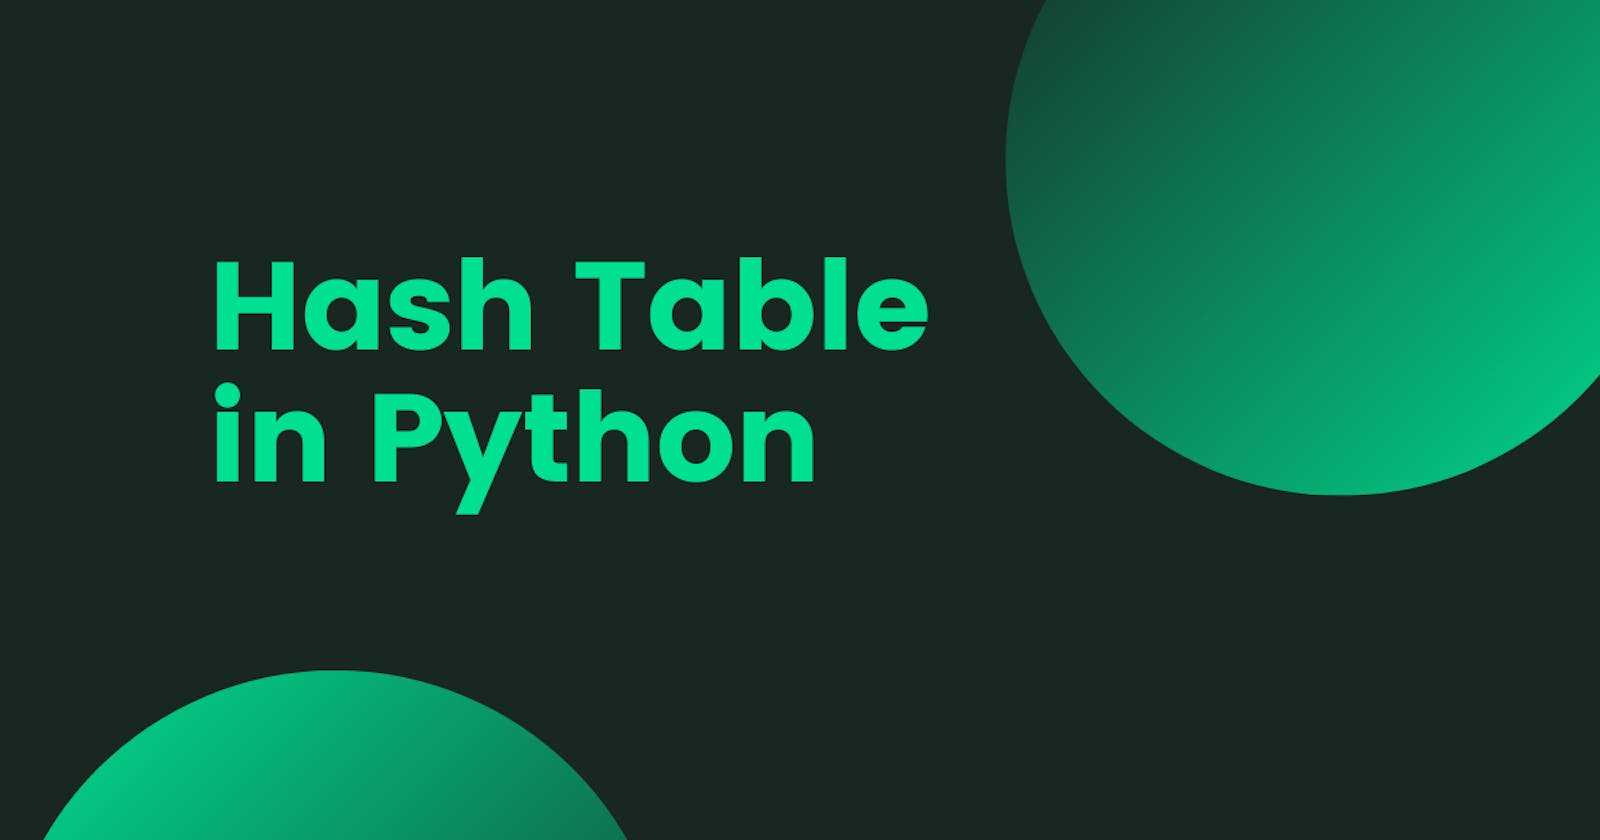 Hash Table in Python